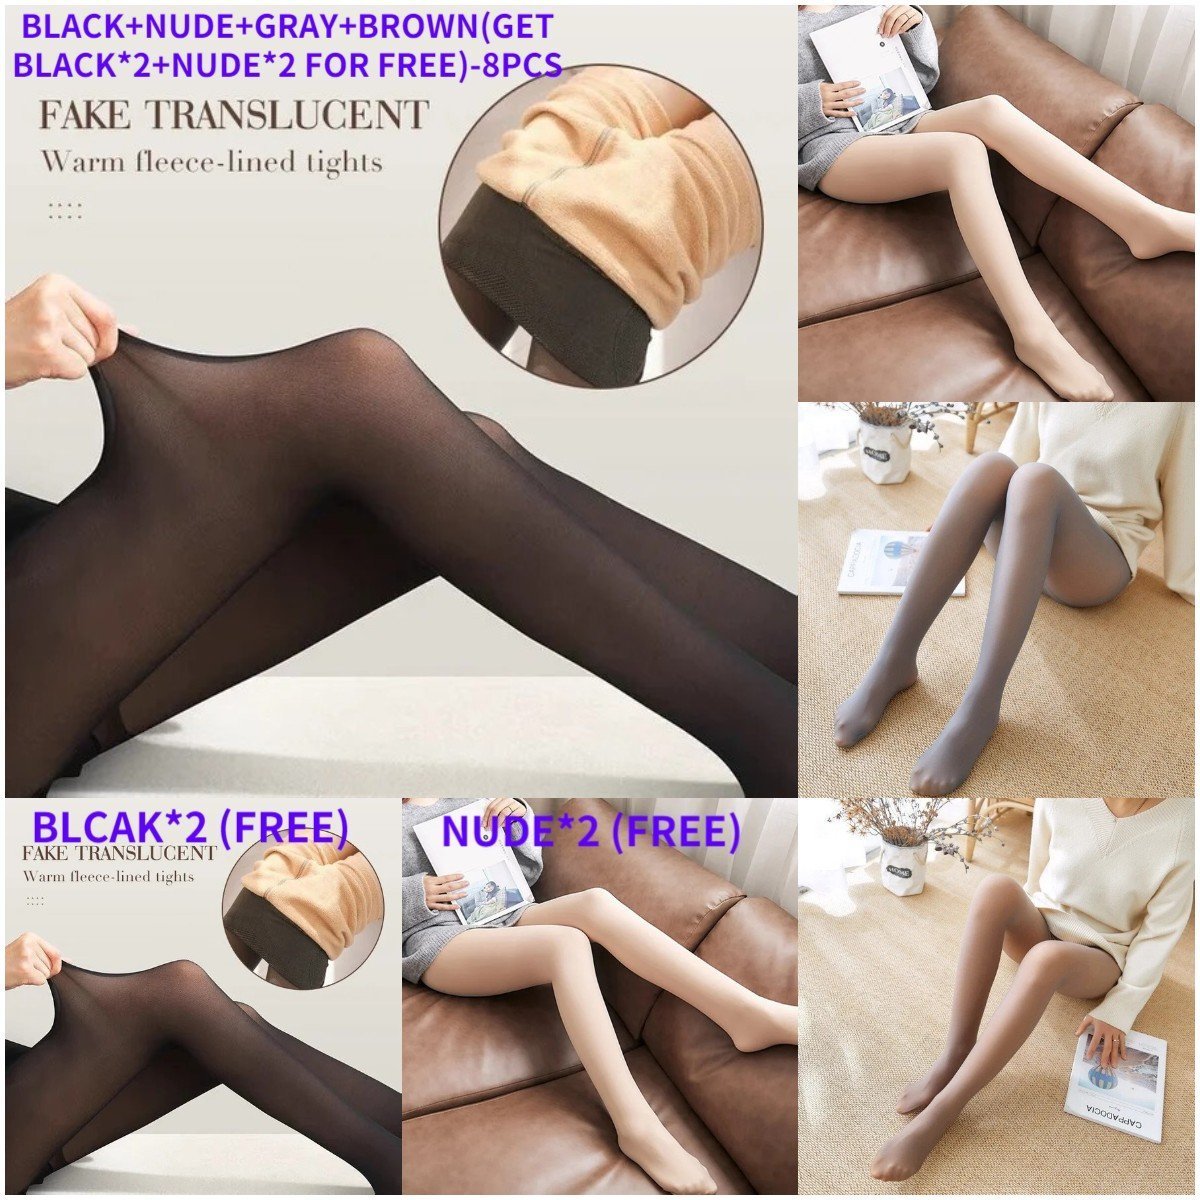 Cozy Cloudy Tights,Women's Fall Winter Warm Fake Translucent Nude